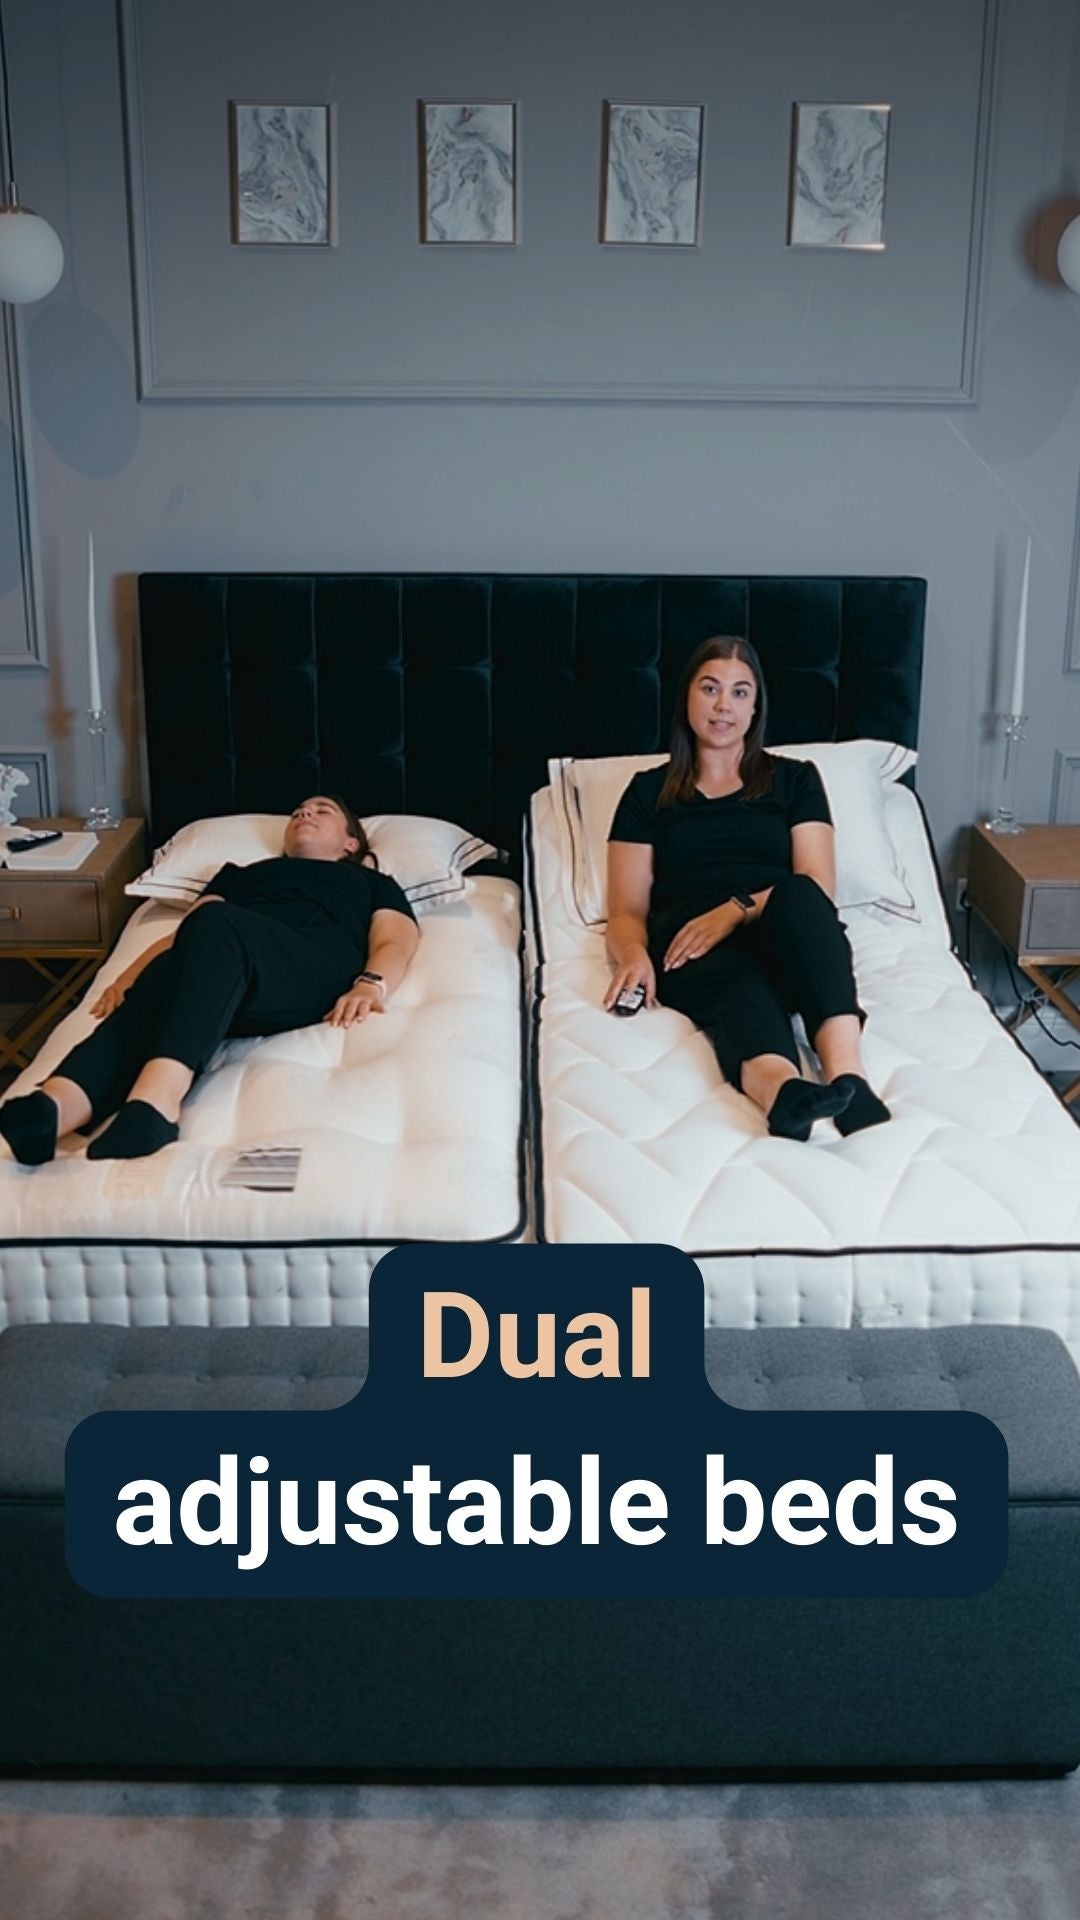 Two women laid on a dual adjustable bed with the caption 'Dual adjustable beds'